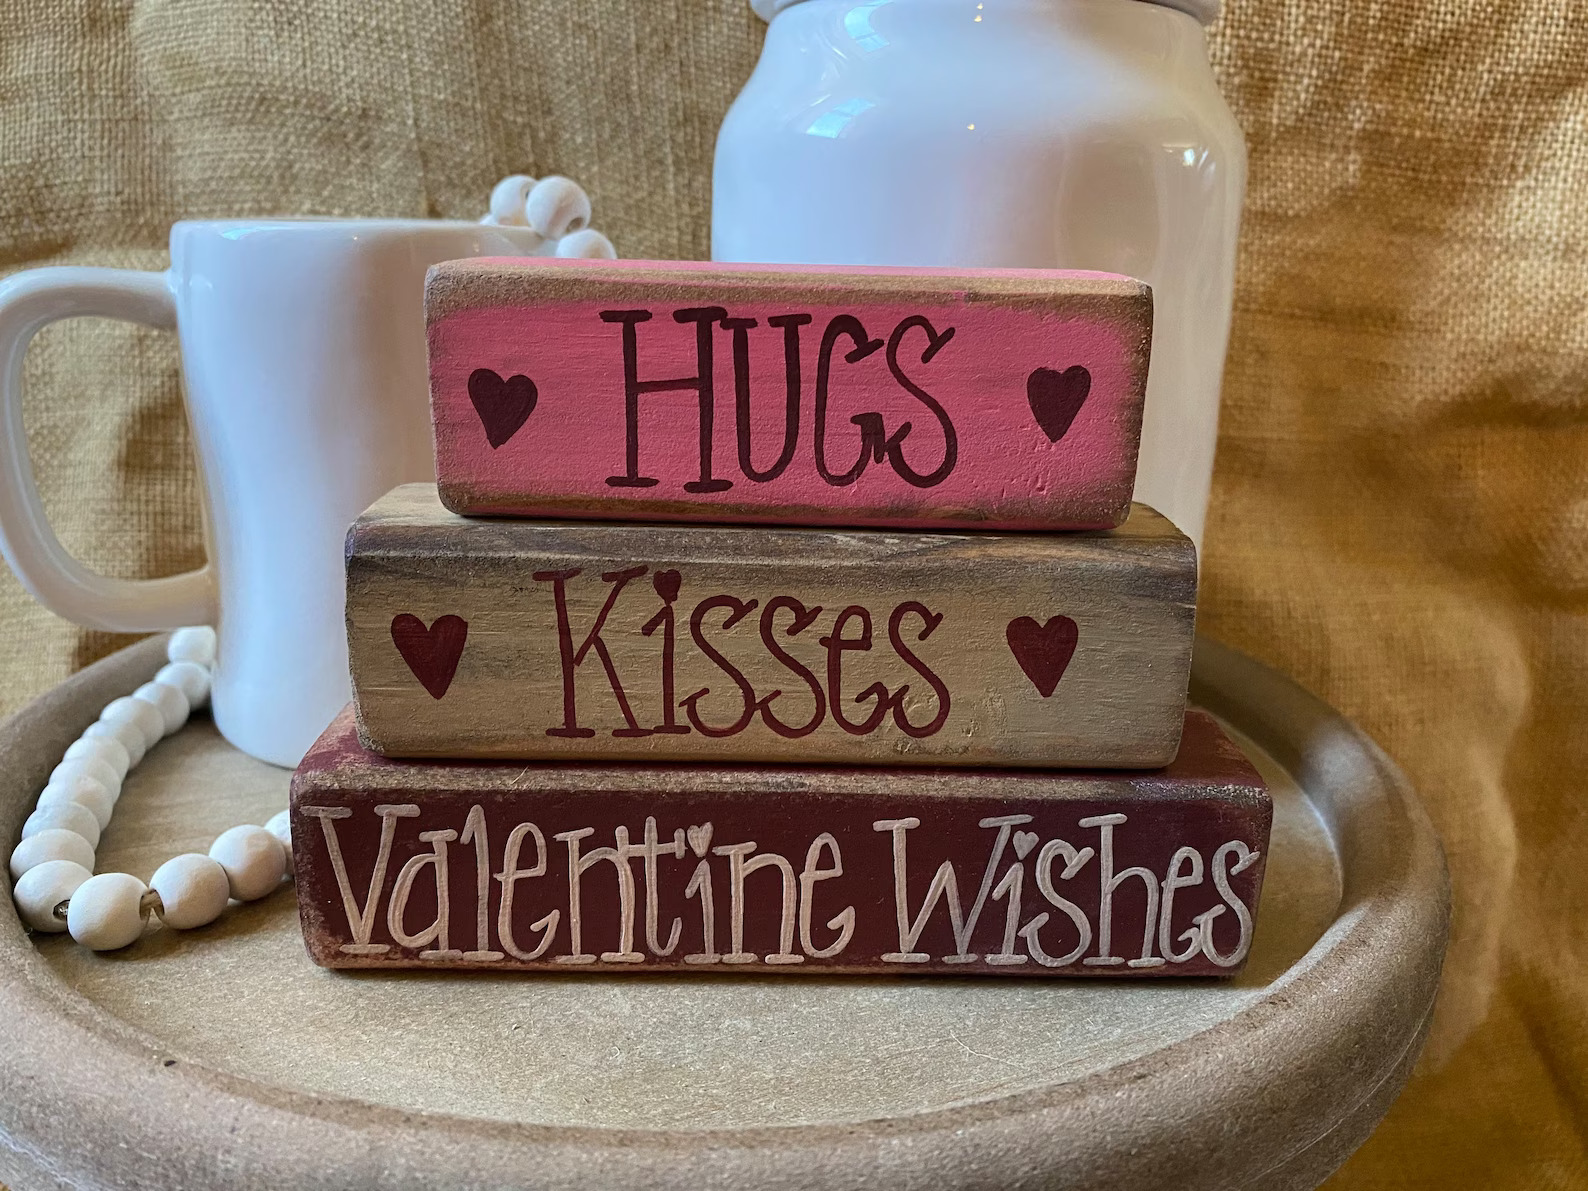 18 Creative Valentine's Day Decorations for Last Minute Touches